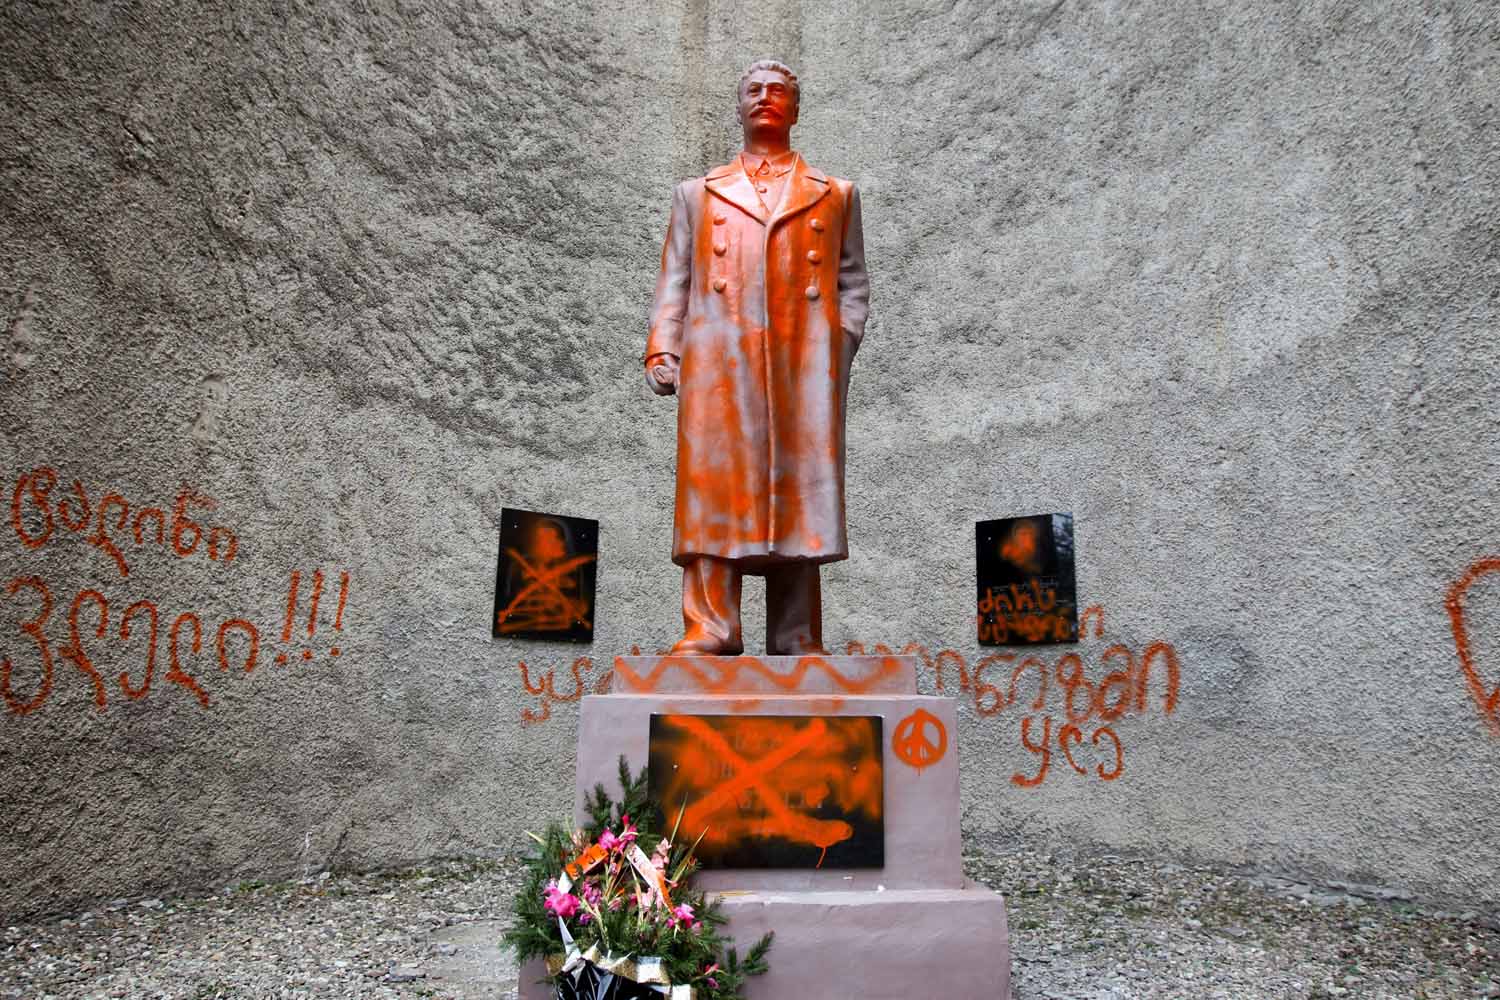 New Stalin monument in Telavi paint bombed